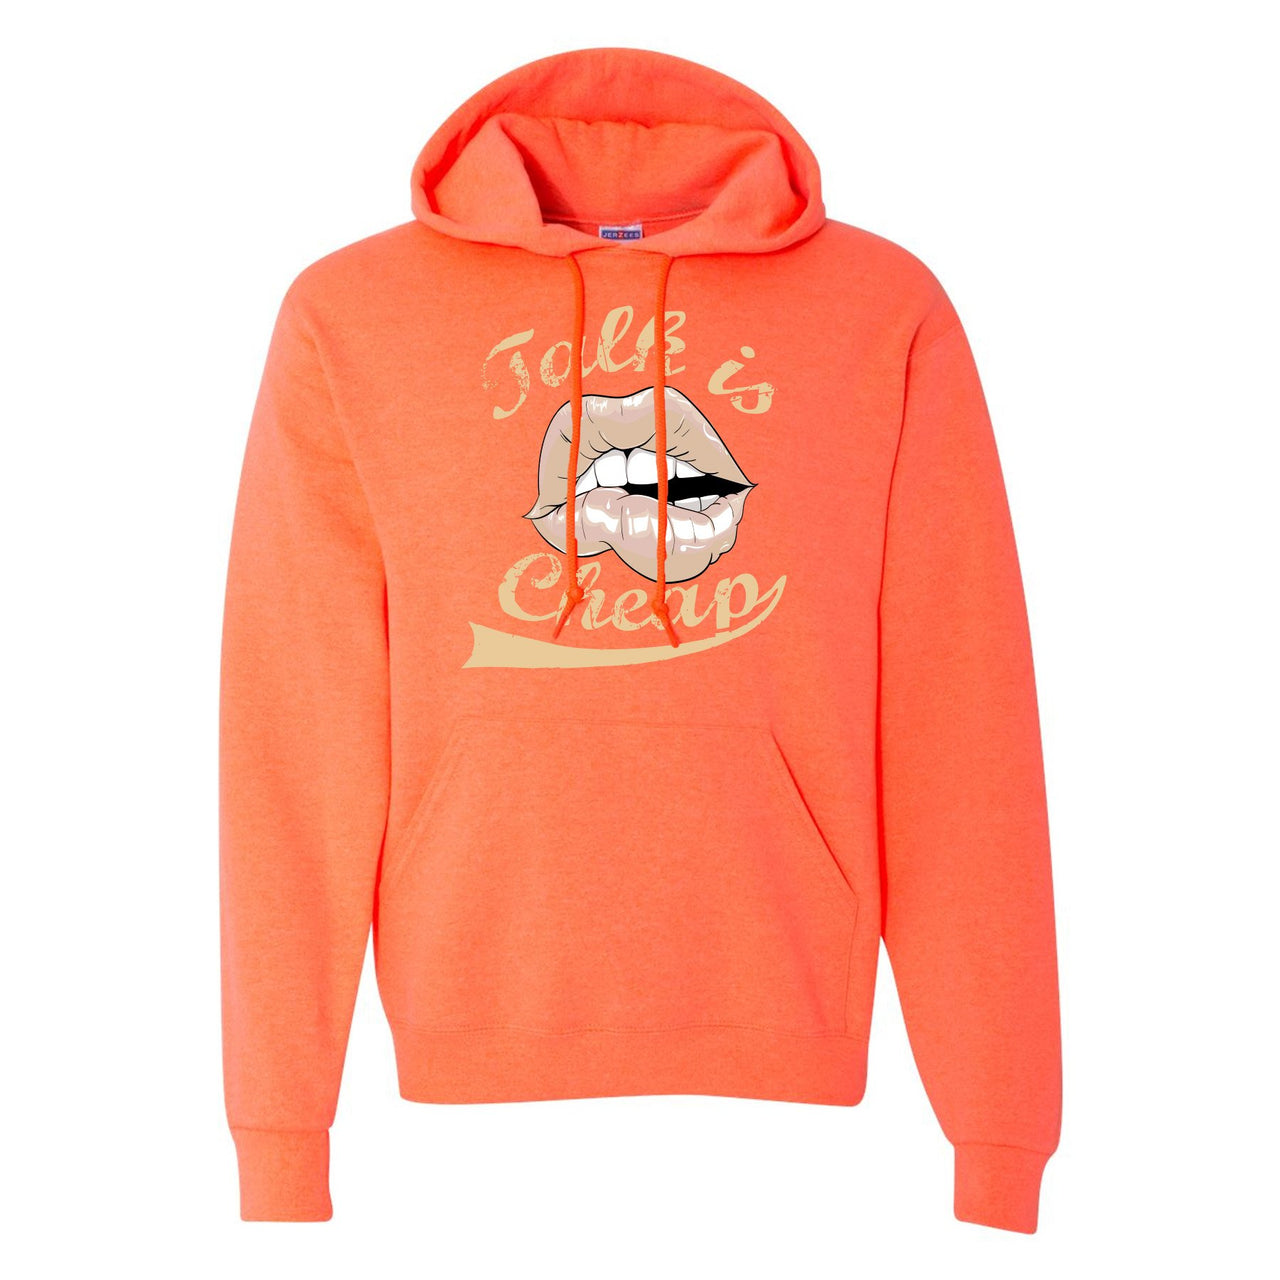 Clay v2 350s Hoodie | Talking Lips, Heathered Coral